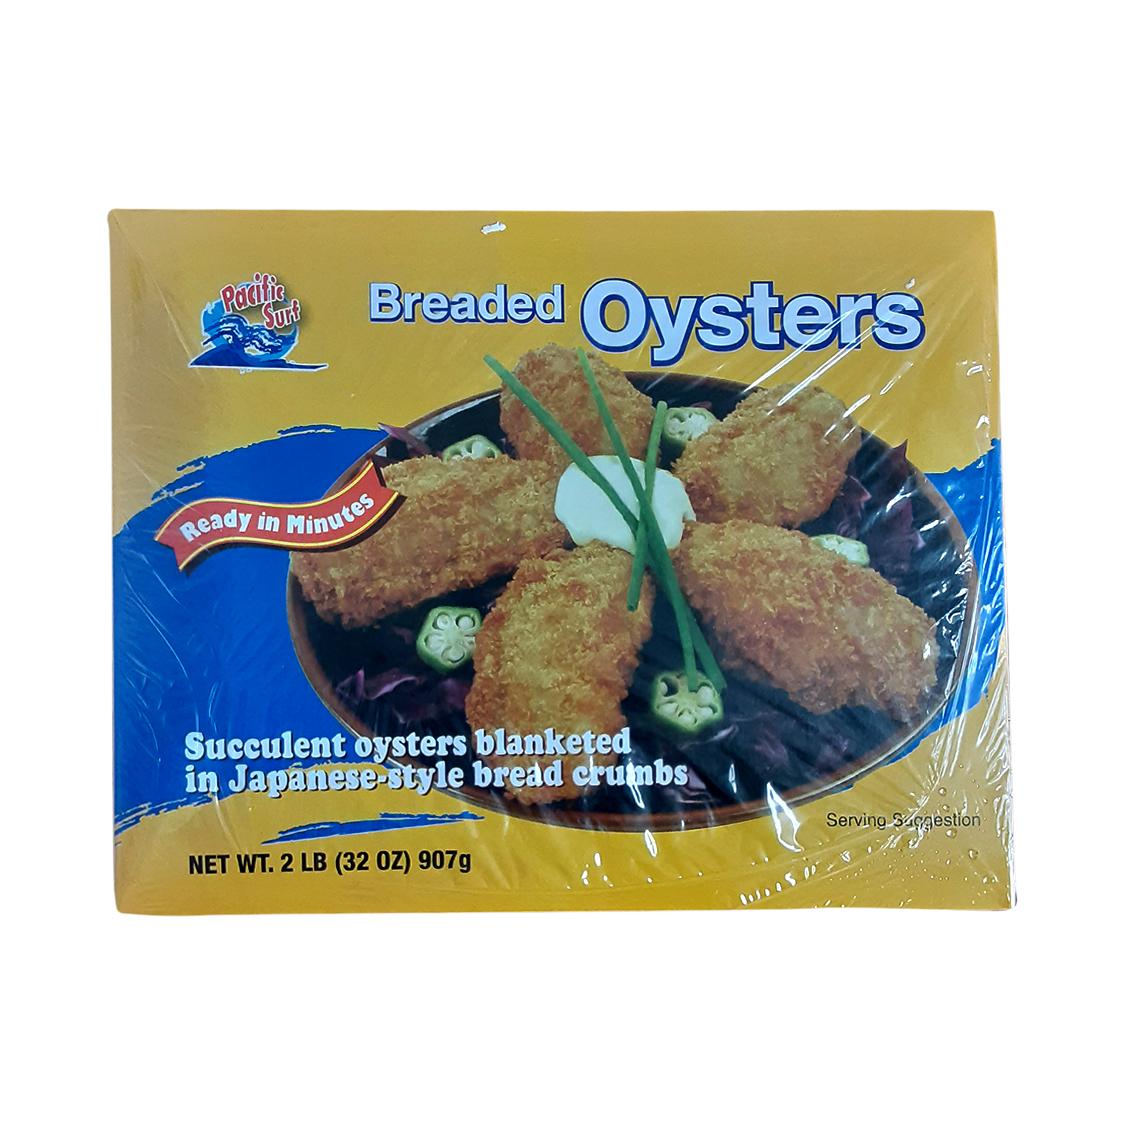 Pacific Surf Brd Oyster 2lb 2lbs